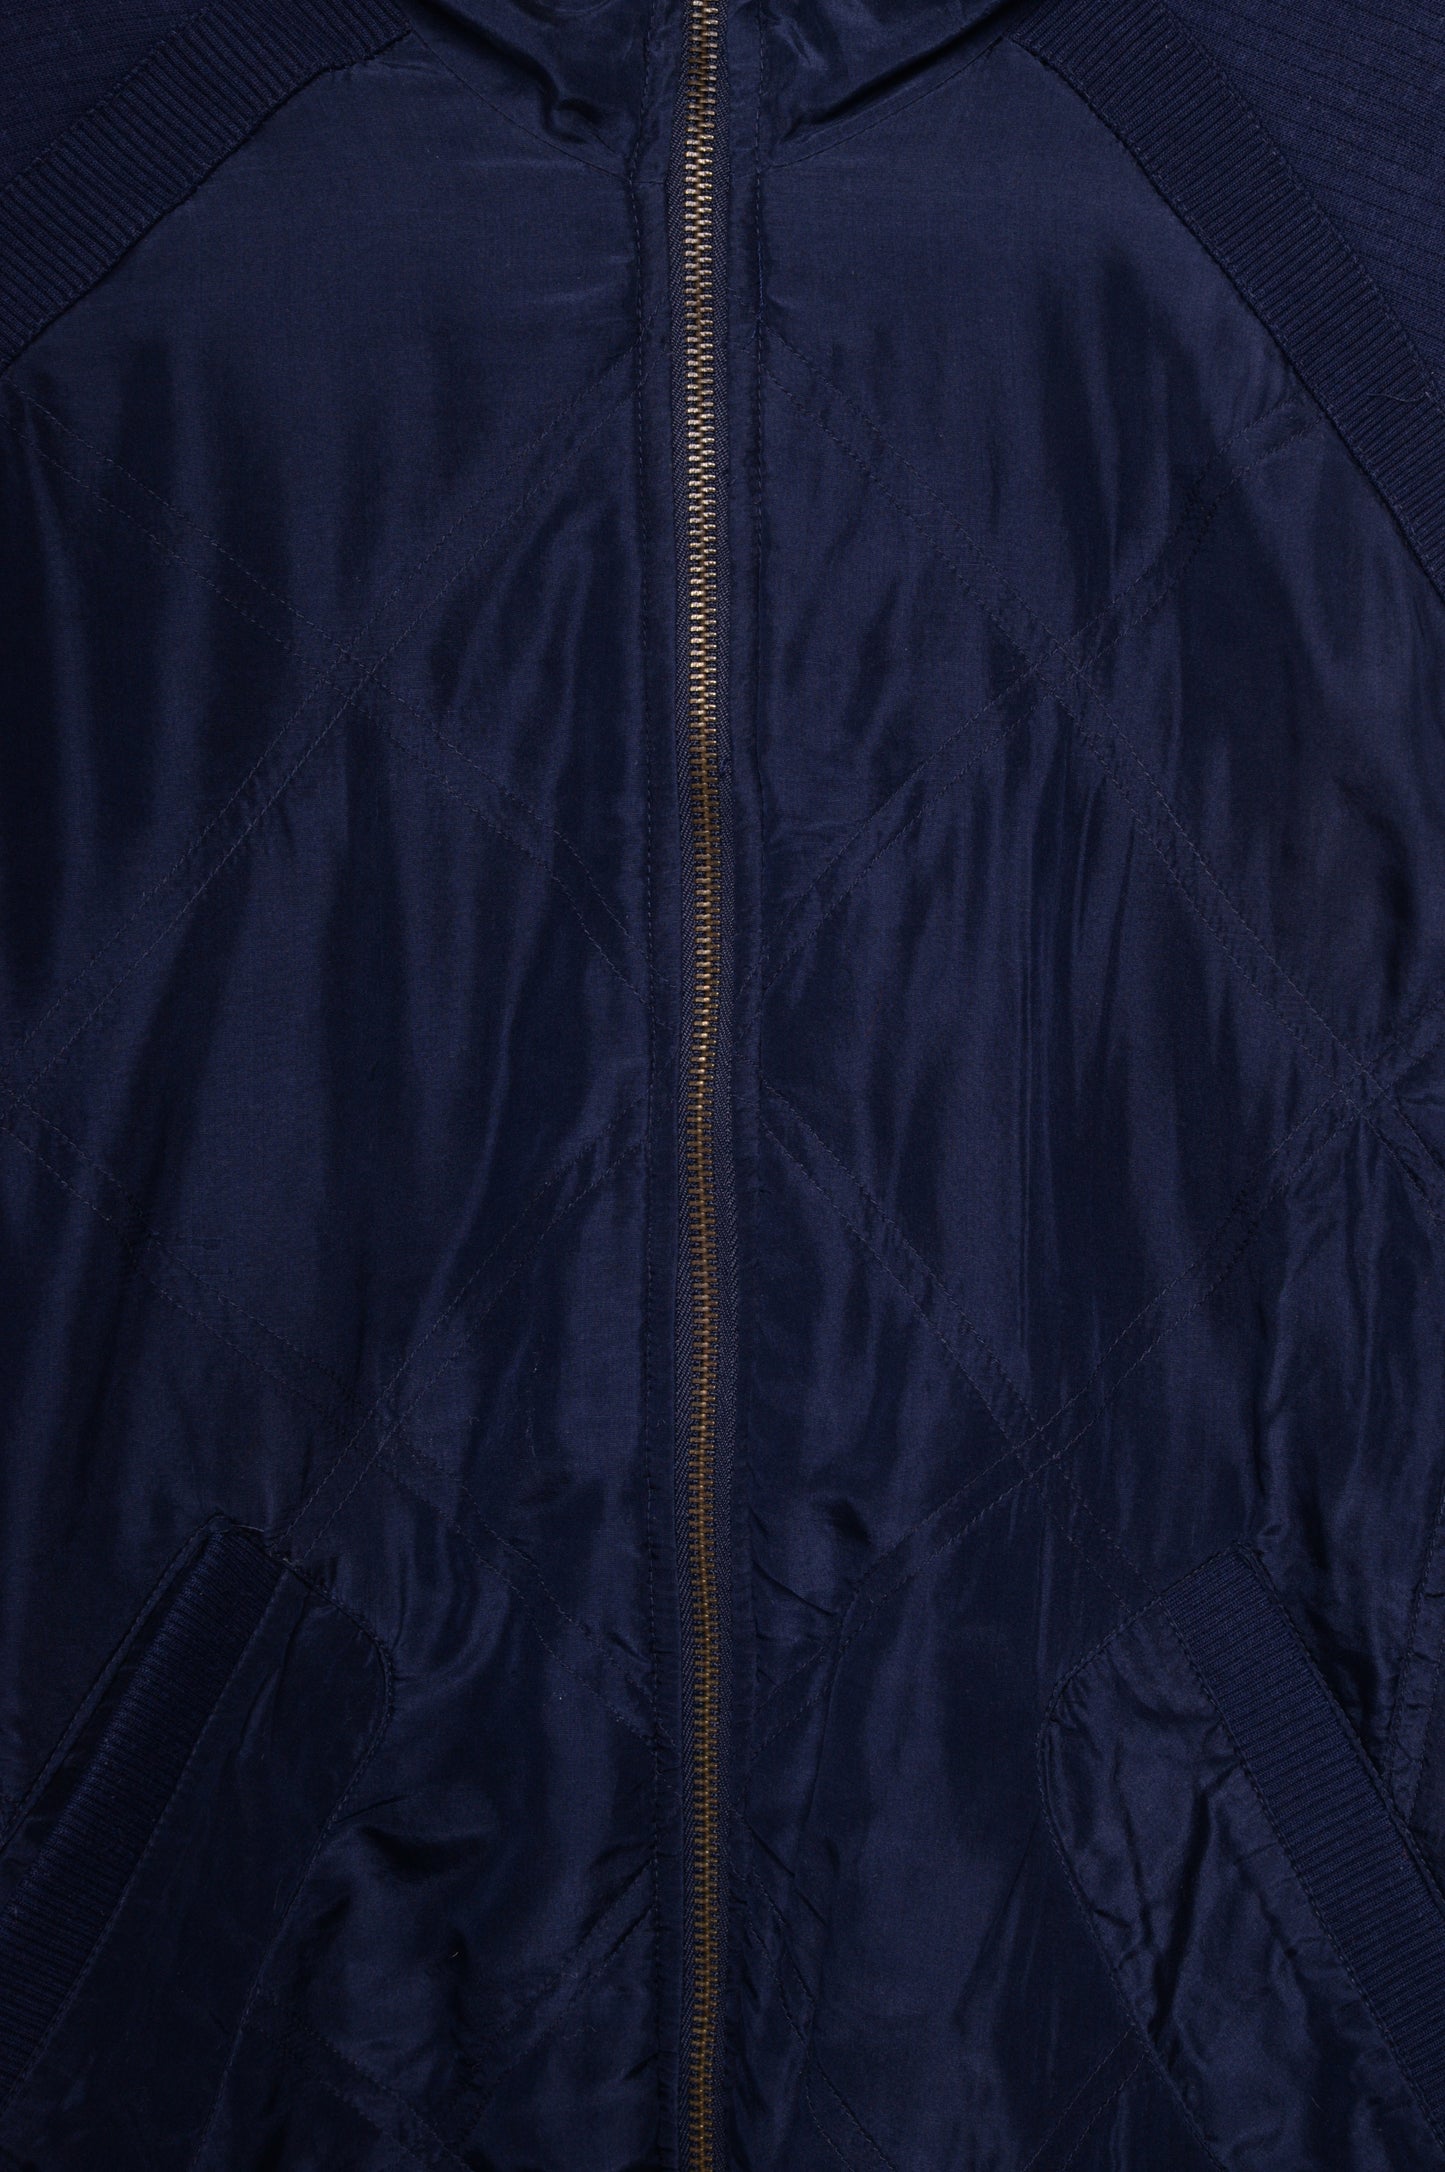 Navy Quilted Lightweight Jacket